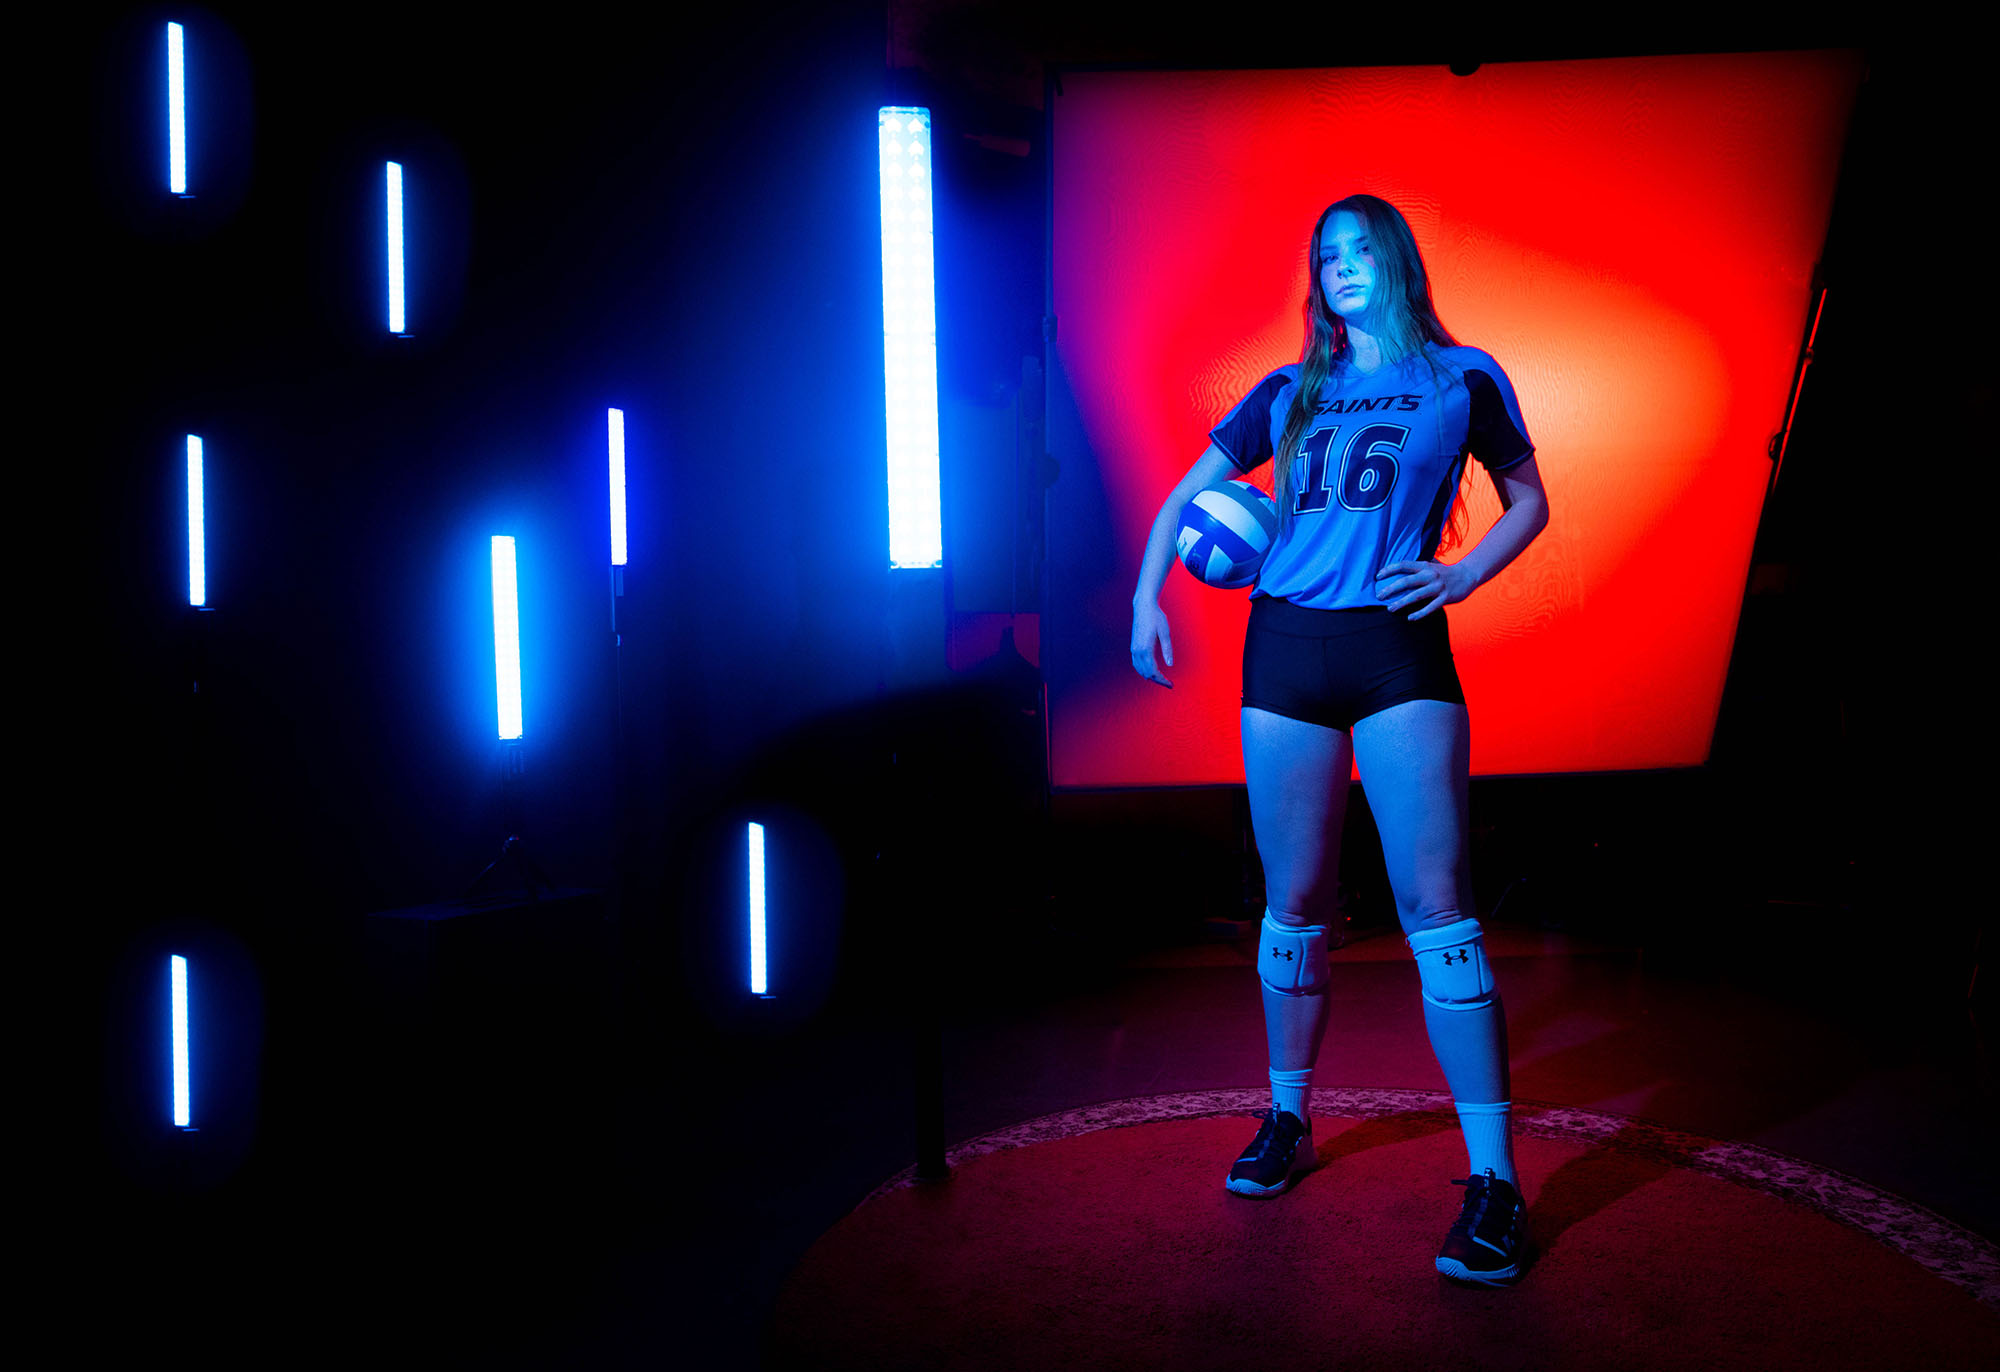 Santa Fe College Volleyball player Katelyn Crofts photographed on Aug. 3, 2021 in Gainesville, FL. (Photo by Matt Stamey/Santa Fe College) ***Subjects have Signed Photo Releases***